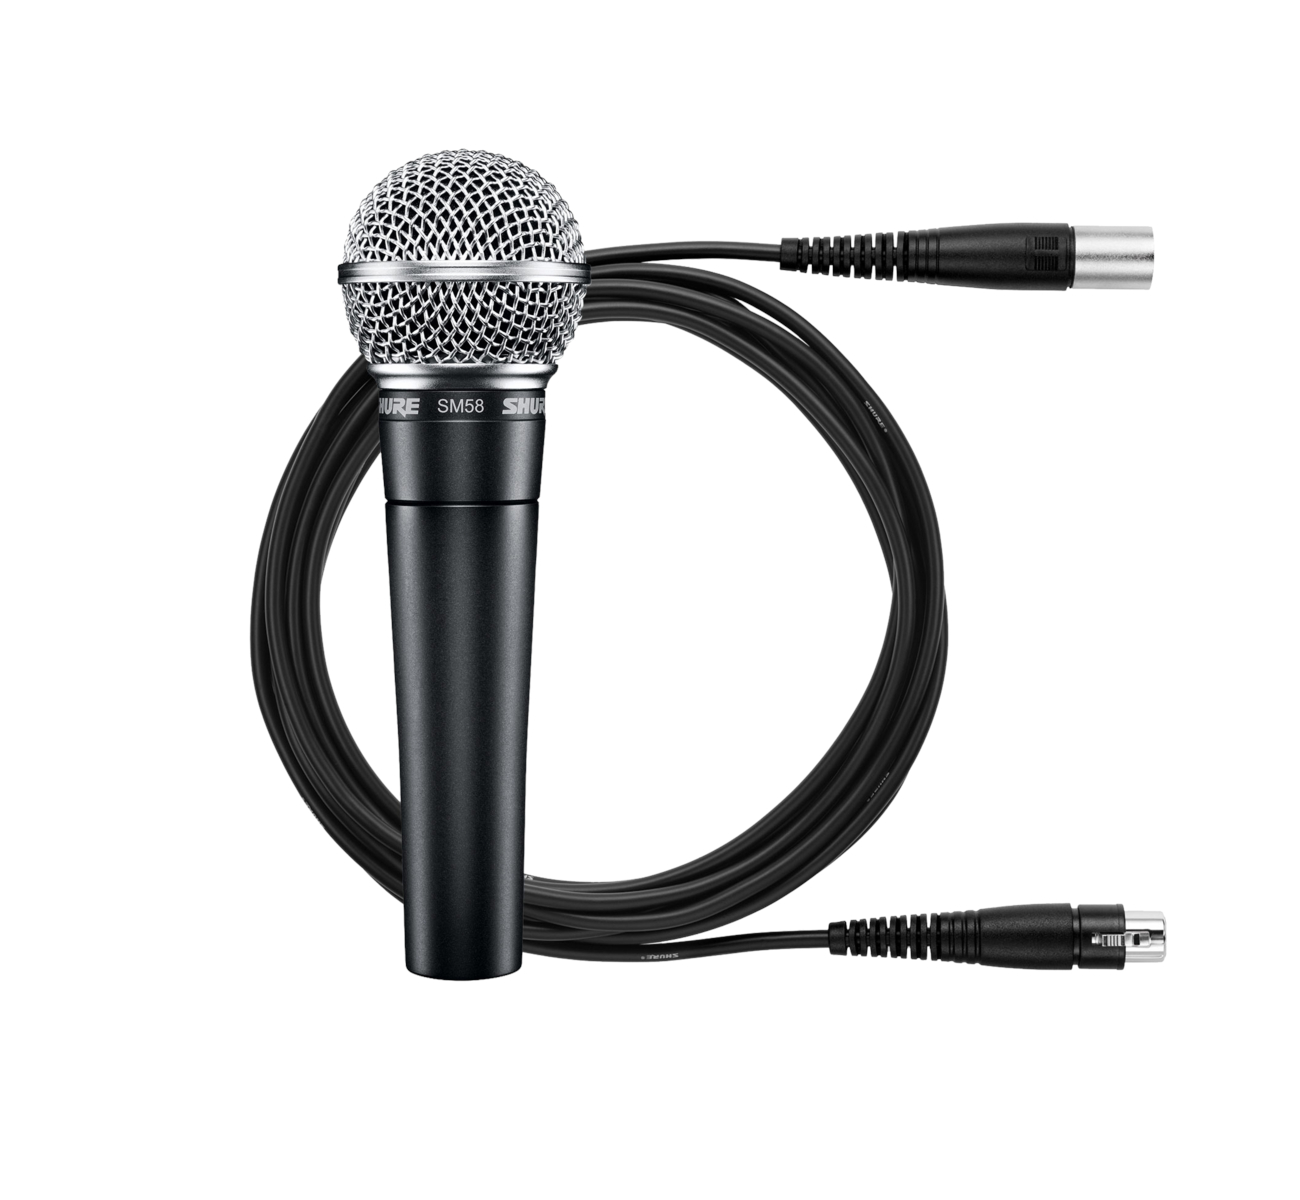 Shure SM58 Dynamic Microphone Review